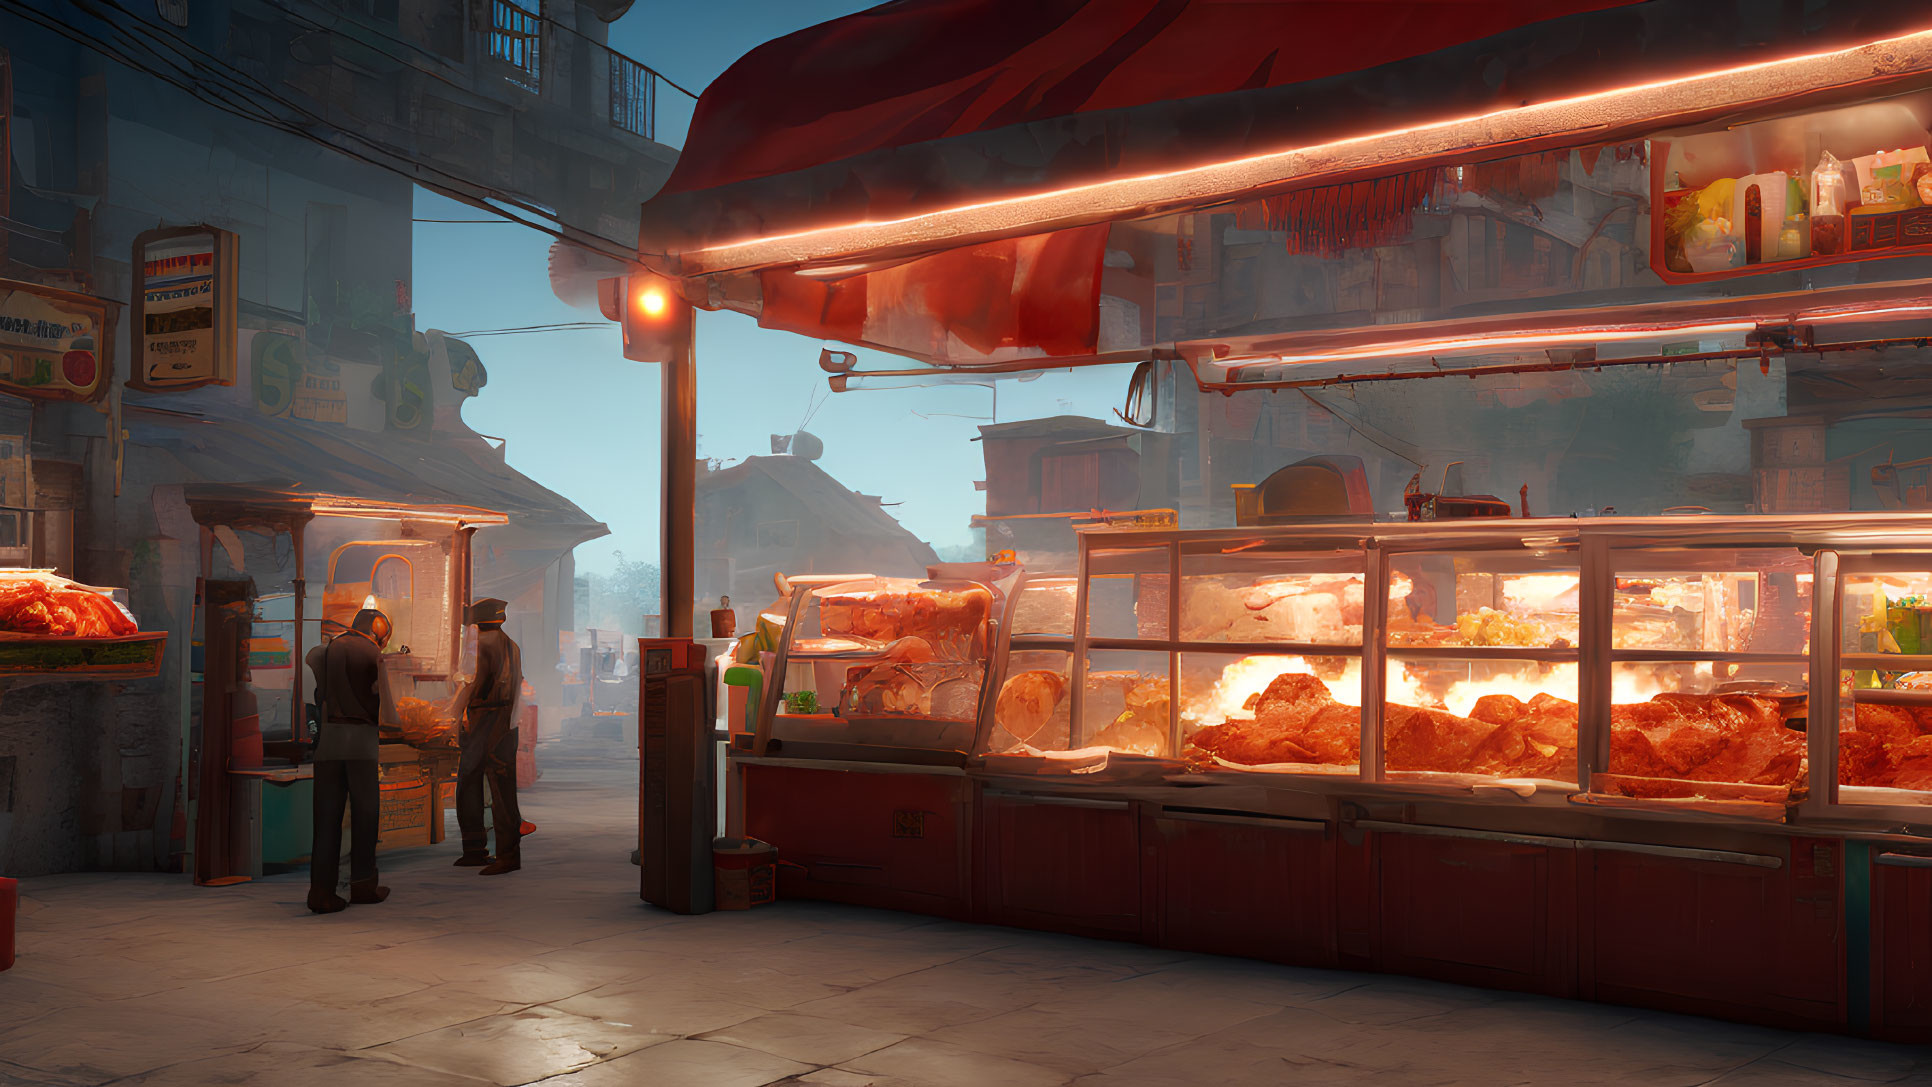 Vibrant Dusk Street Market with Food Stalls and Cozy Lighting